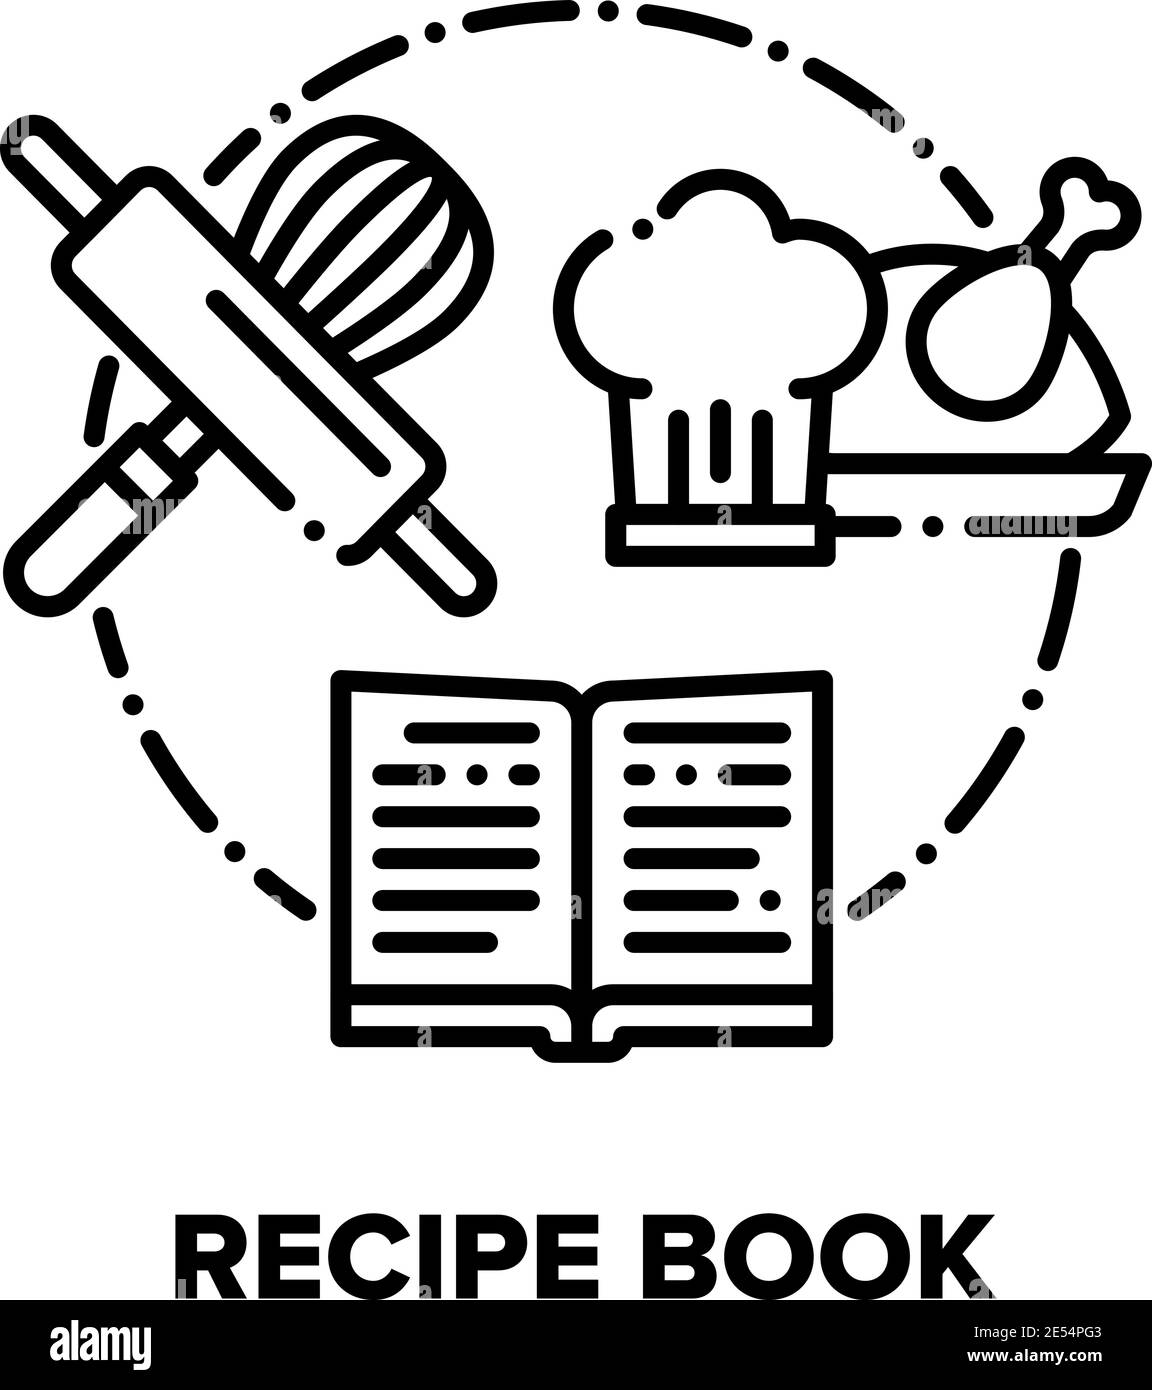 Recipe Book Vector Black And White Stock Photos Images Alamy